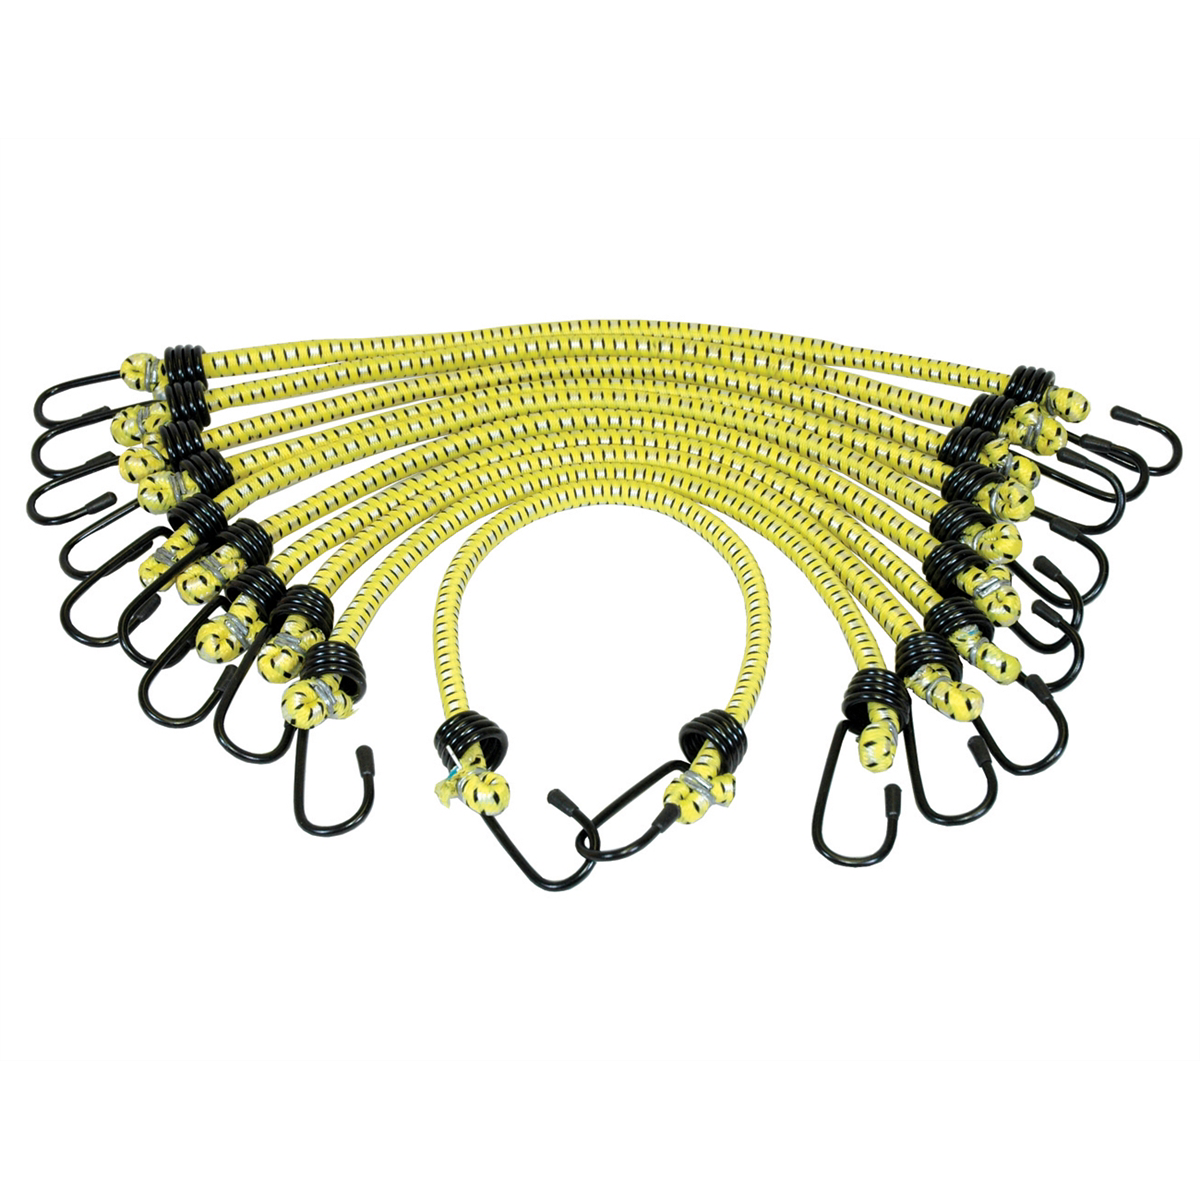 Bungee Cord General Purpose 3/8 In x 30 In - 10/Pk